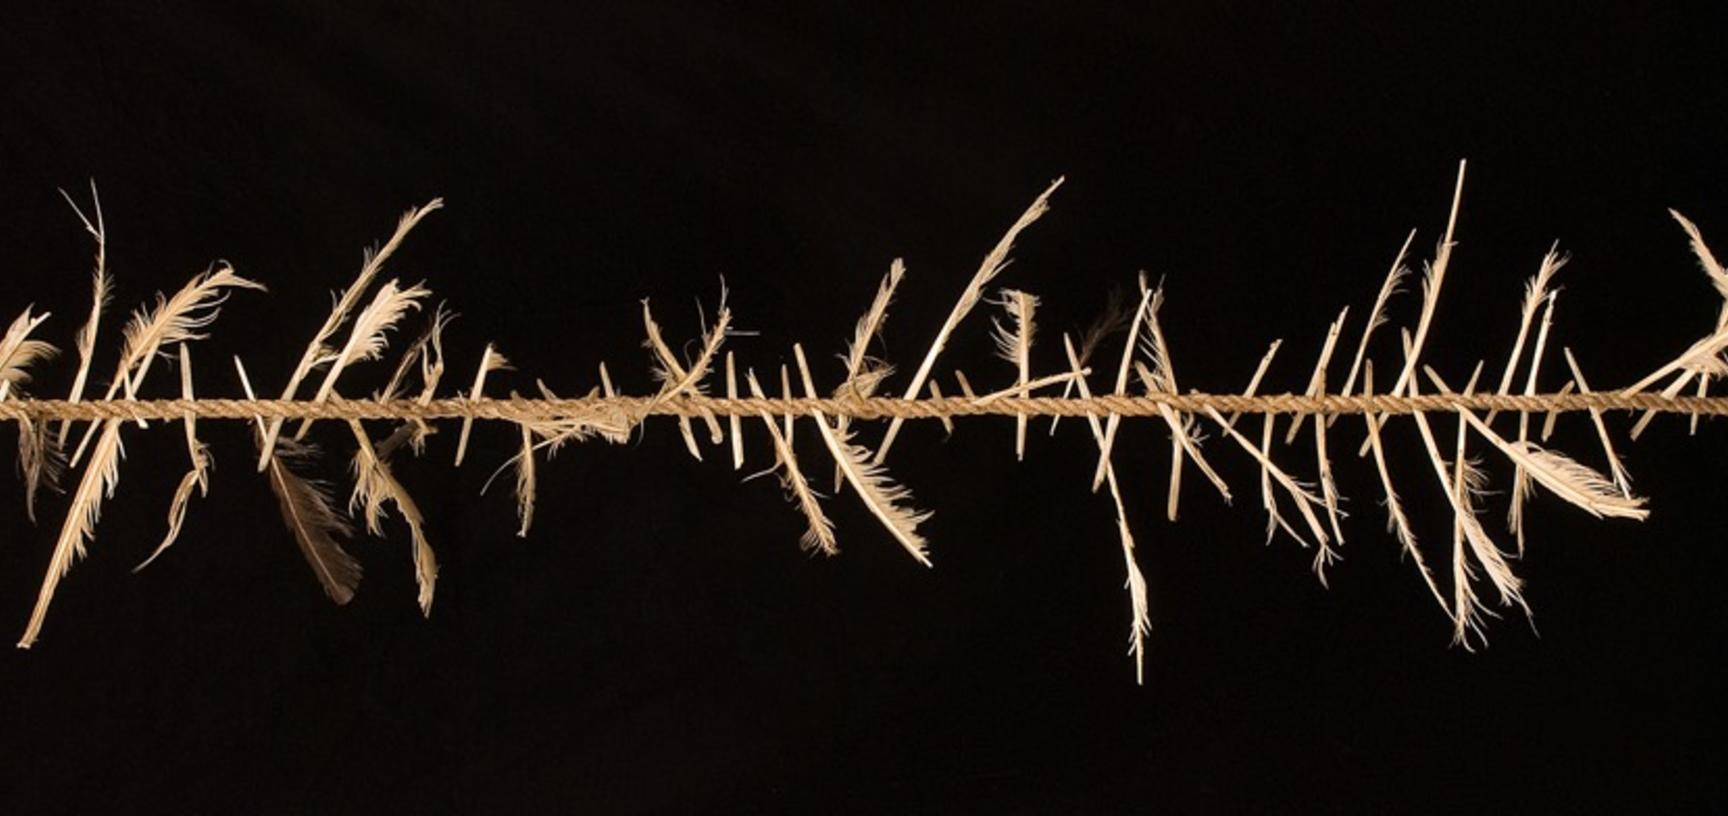 ‘Witch's ladder’ made of rope tied with feathers, England.